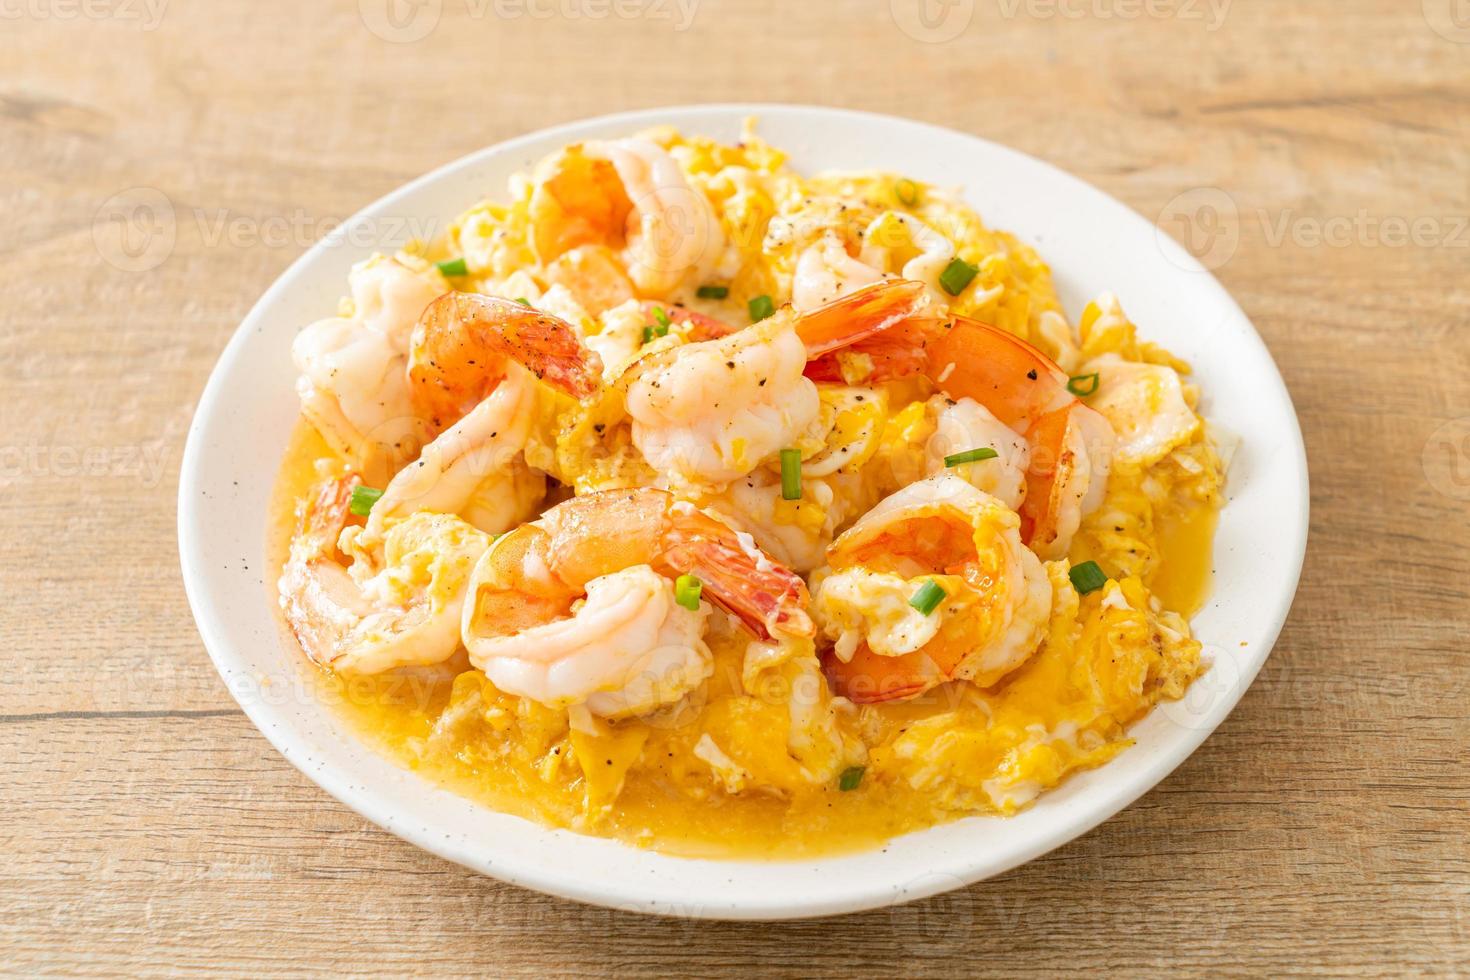 creamy omelet with shrimps or scrambled eggs and shrimps photo